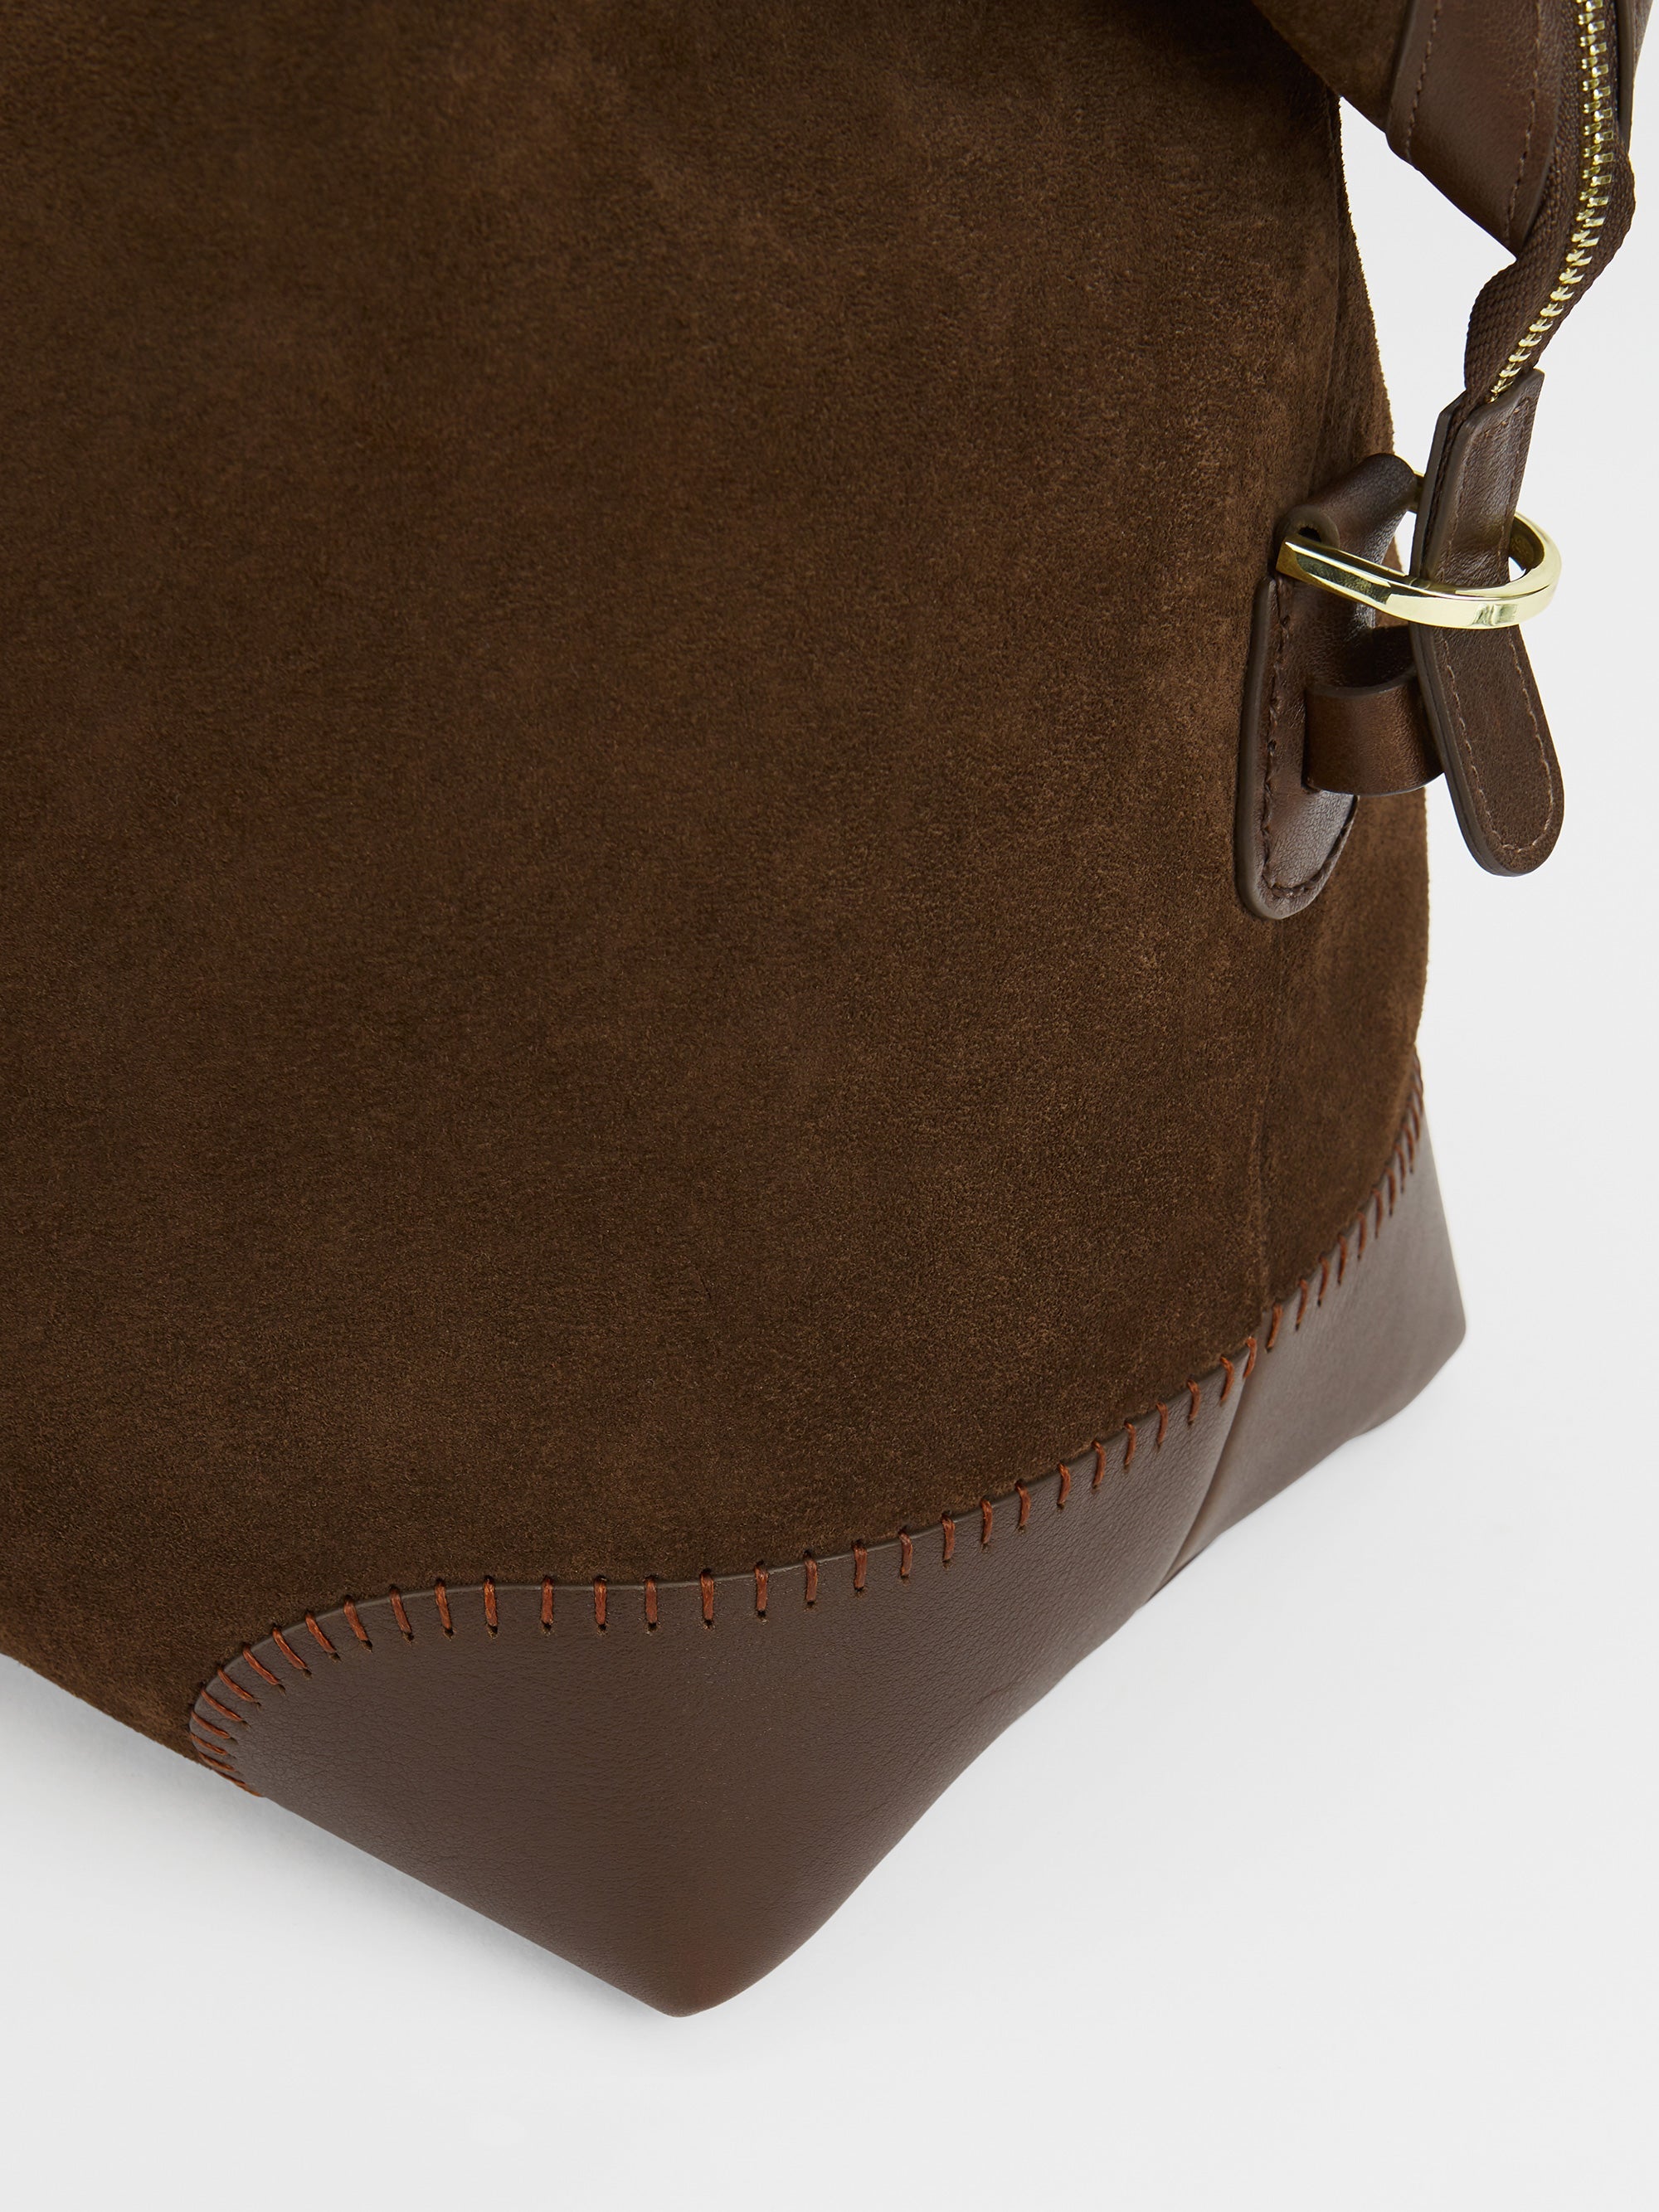 Letter 'C' - The Suede Weekend Bag, Chocolate